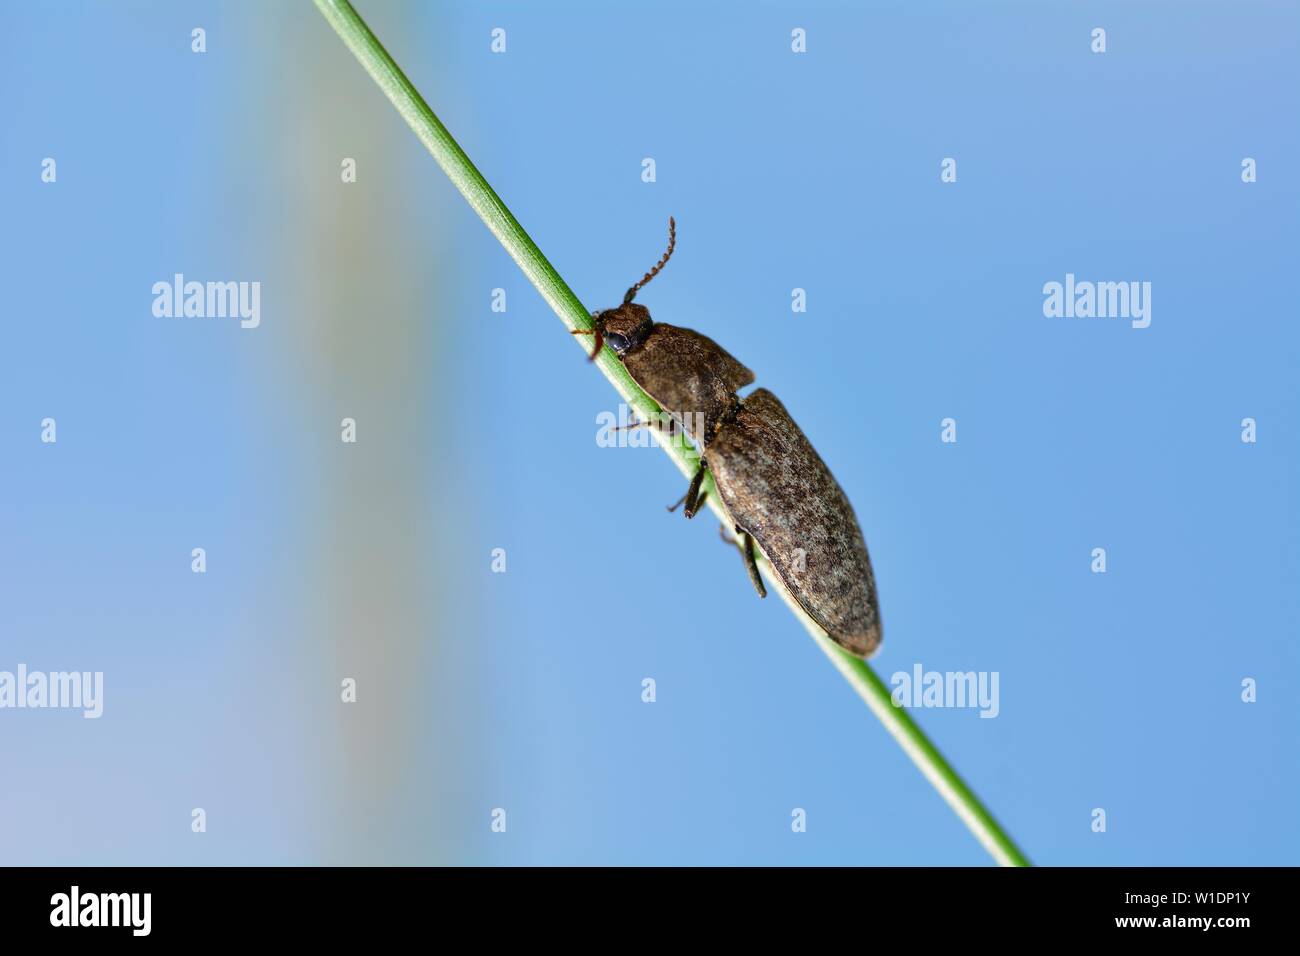 Gray mouse beetle (Agrypnus murinus) on a blade of grass against a blue sky with copy space Stock Photo